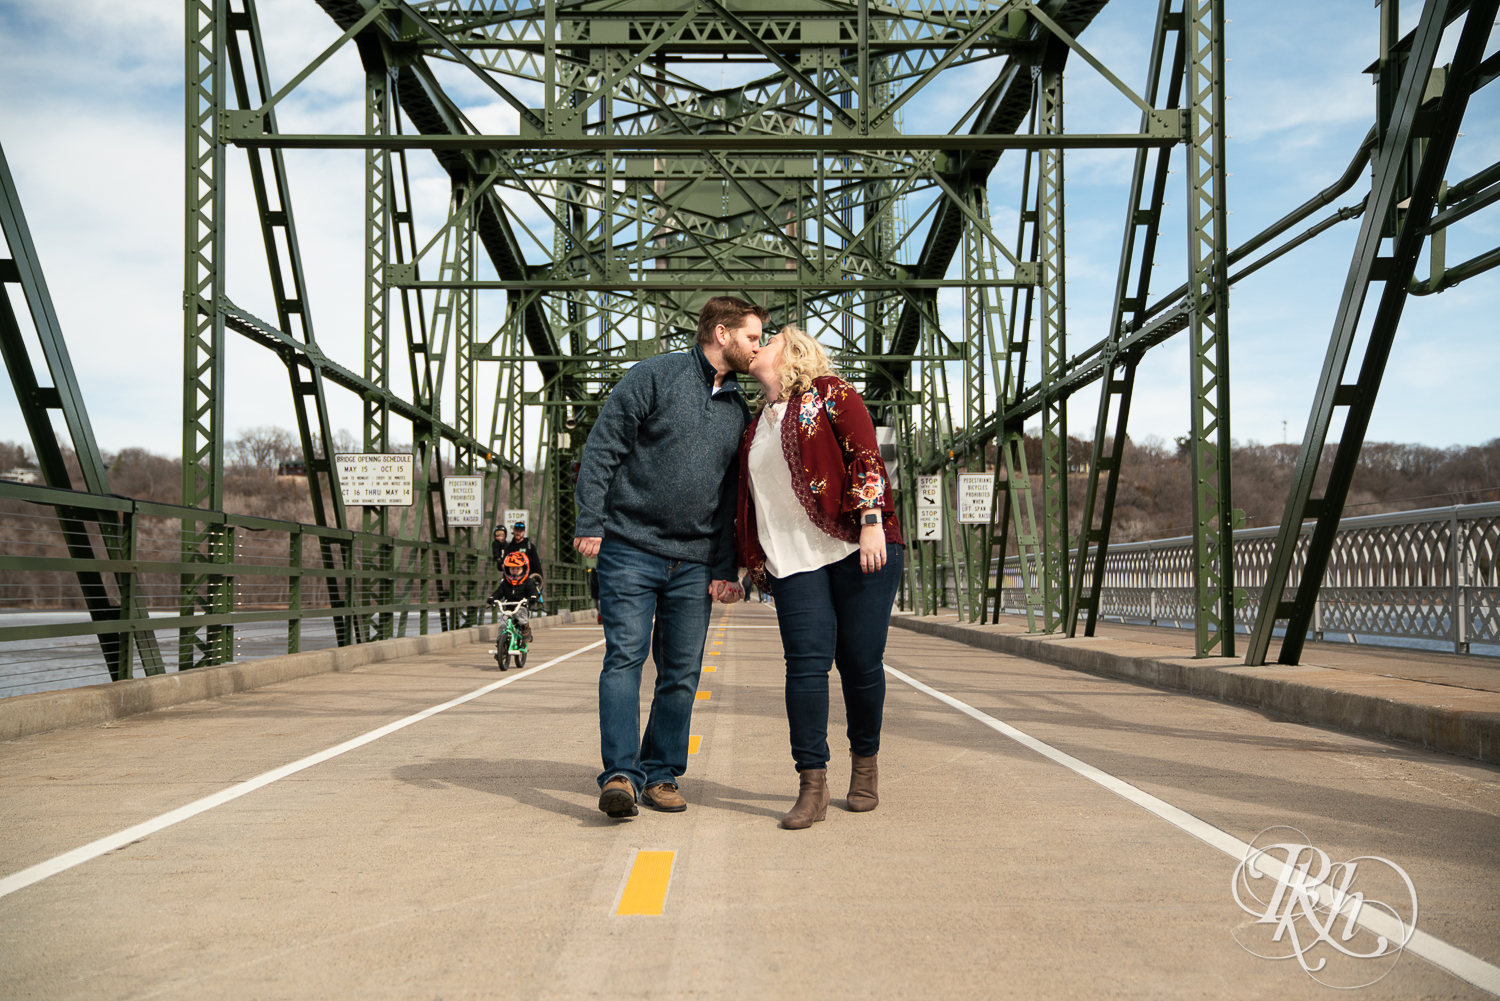 Blond woman and bearded man kiss on bridge over river in Stillwater, Minnesota.